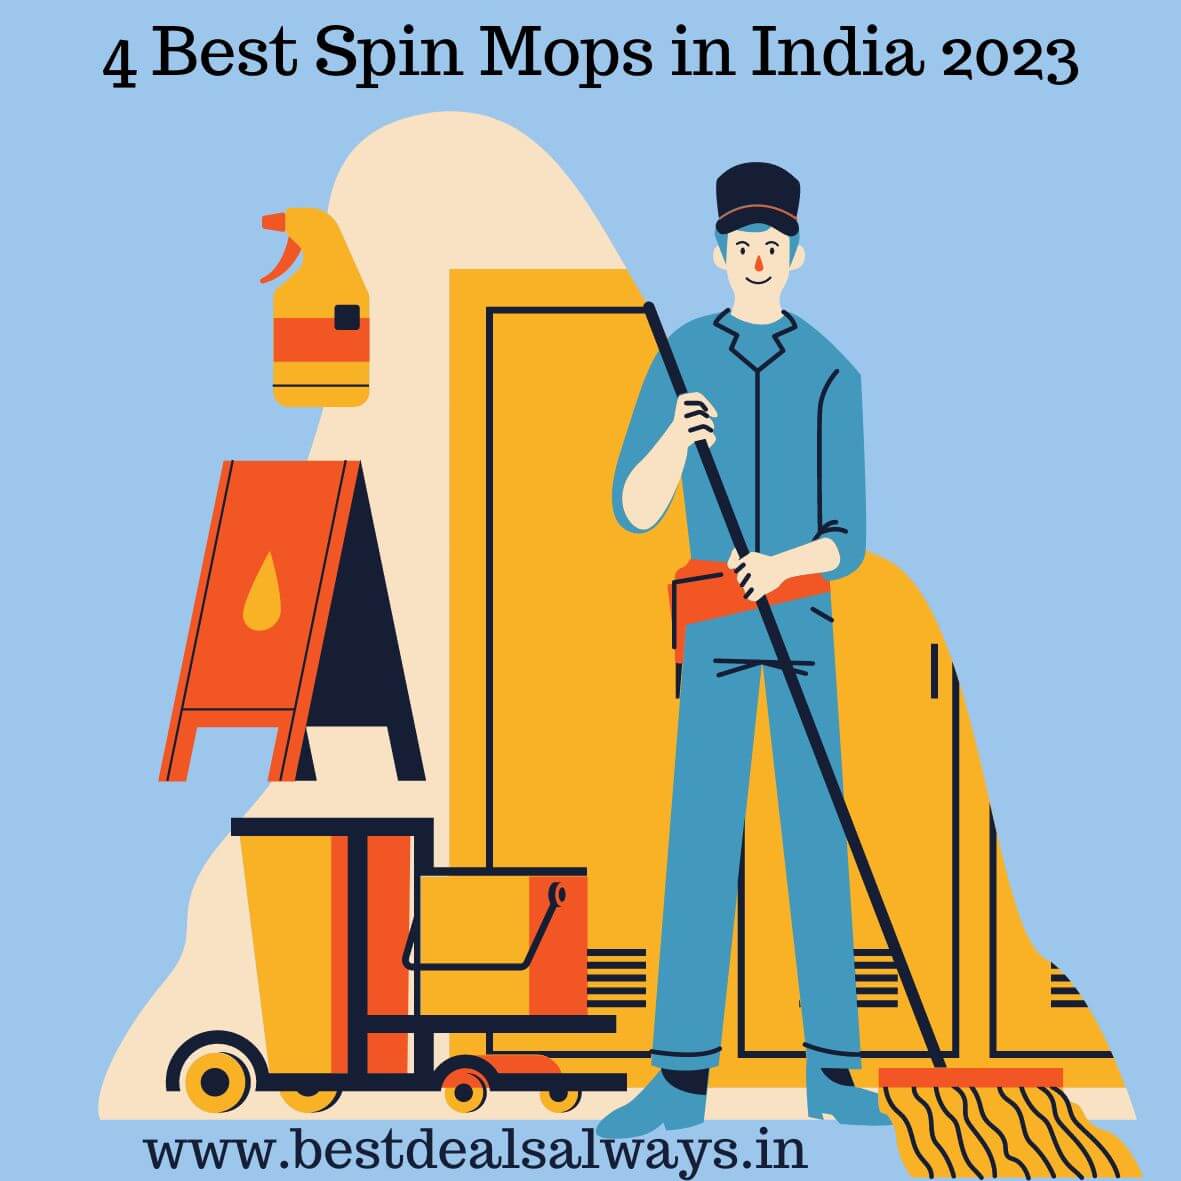 4 Best Spin Mops in India 2023